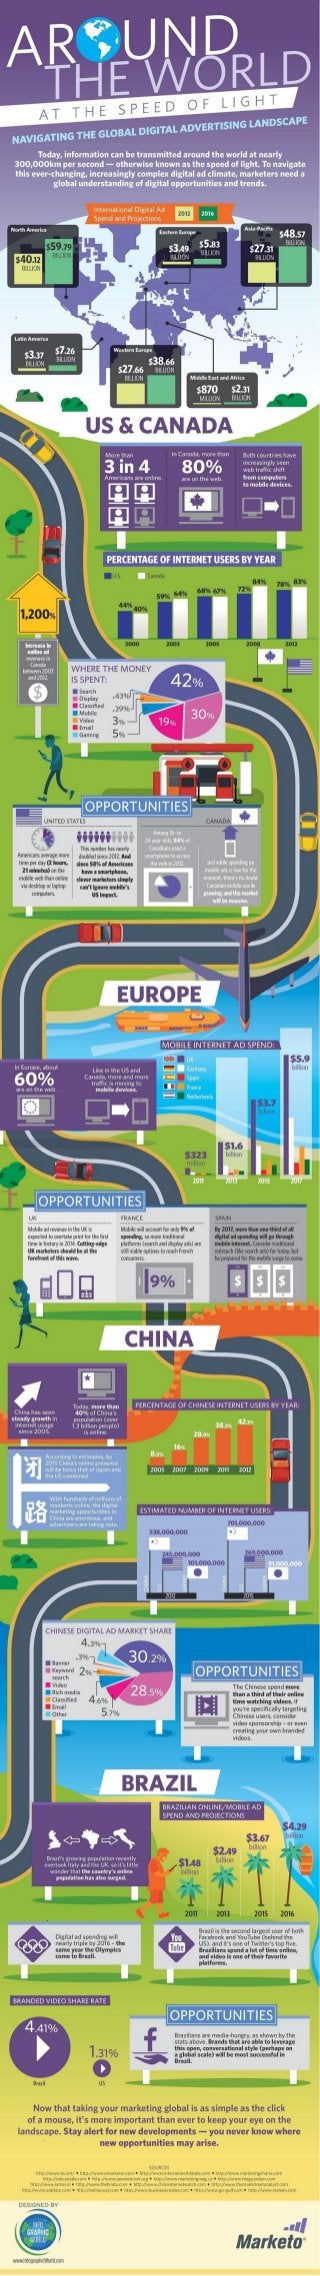 Around the World at the Speed of Light: Navigating the Digital Advertising Landscape